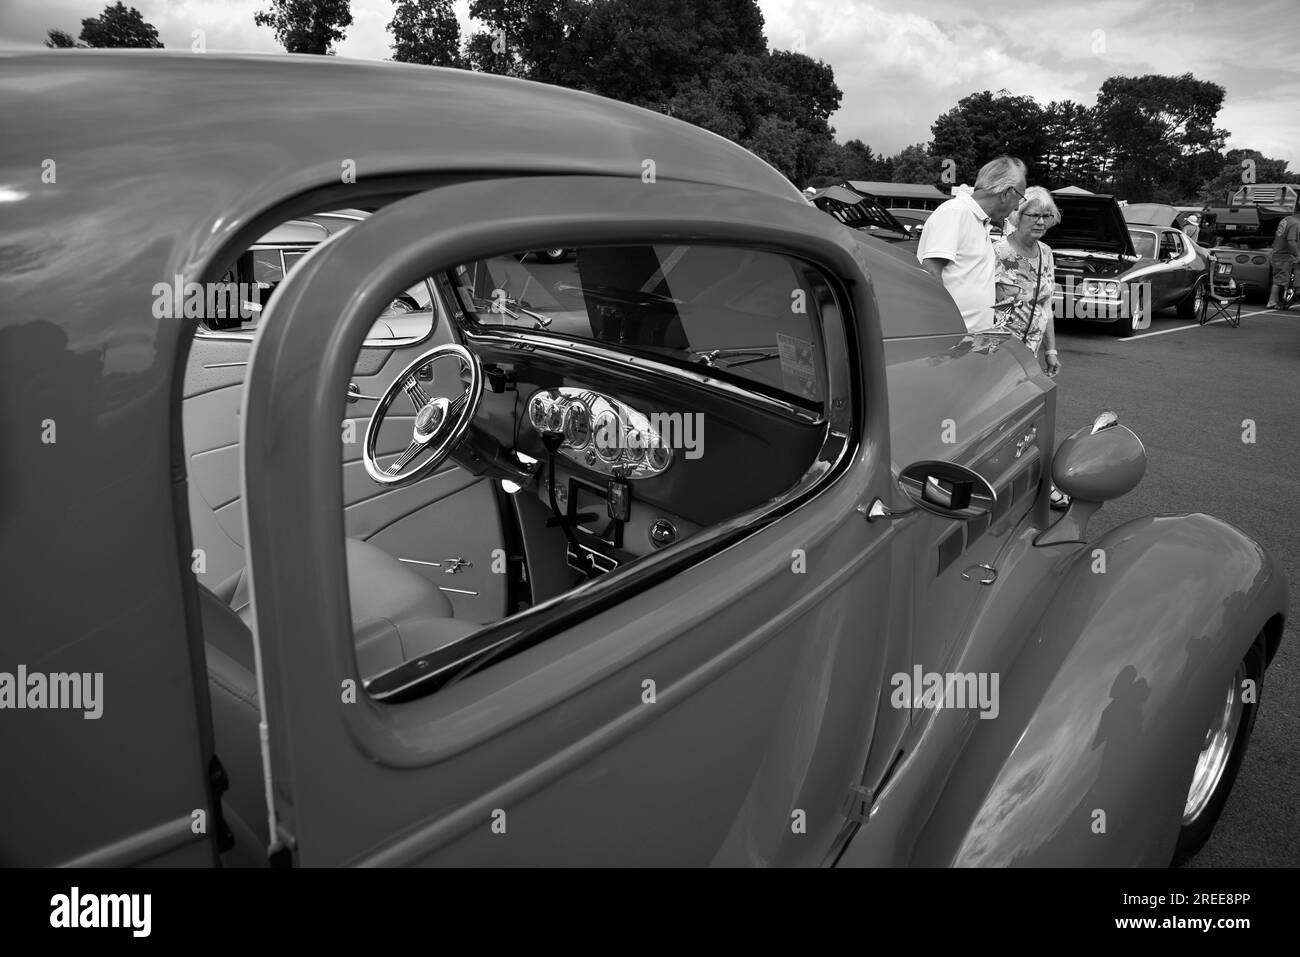 Visitors at an American antique and custom car show walk past a 1937 customized Packard automobile Stock Photo